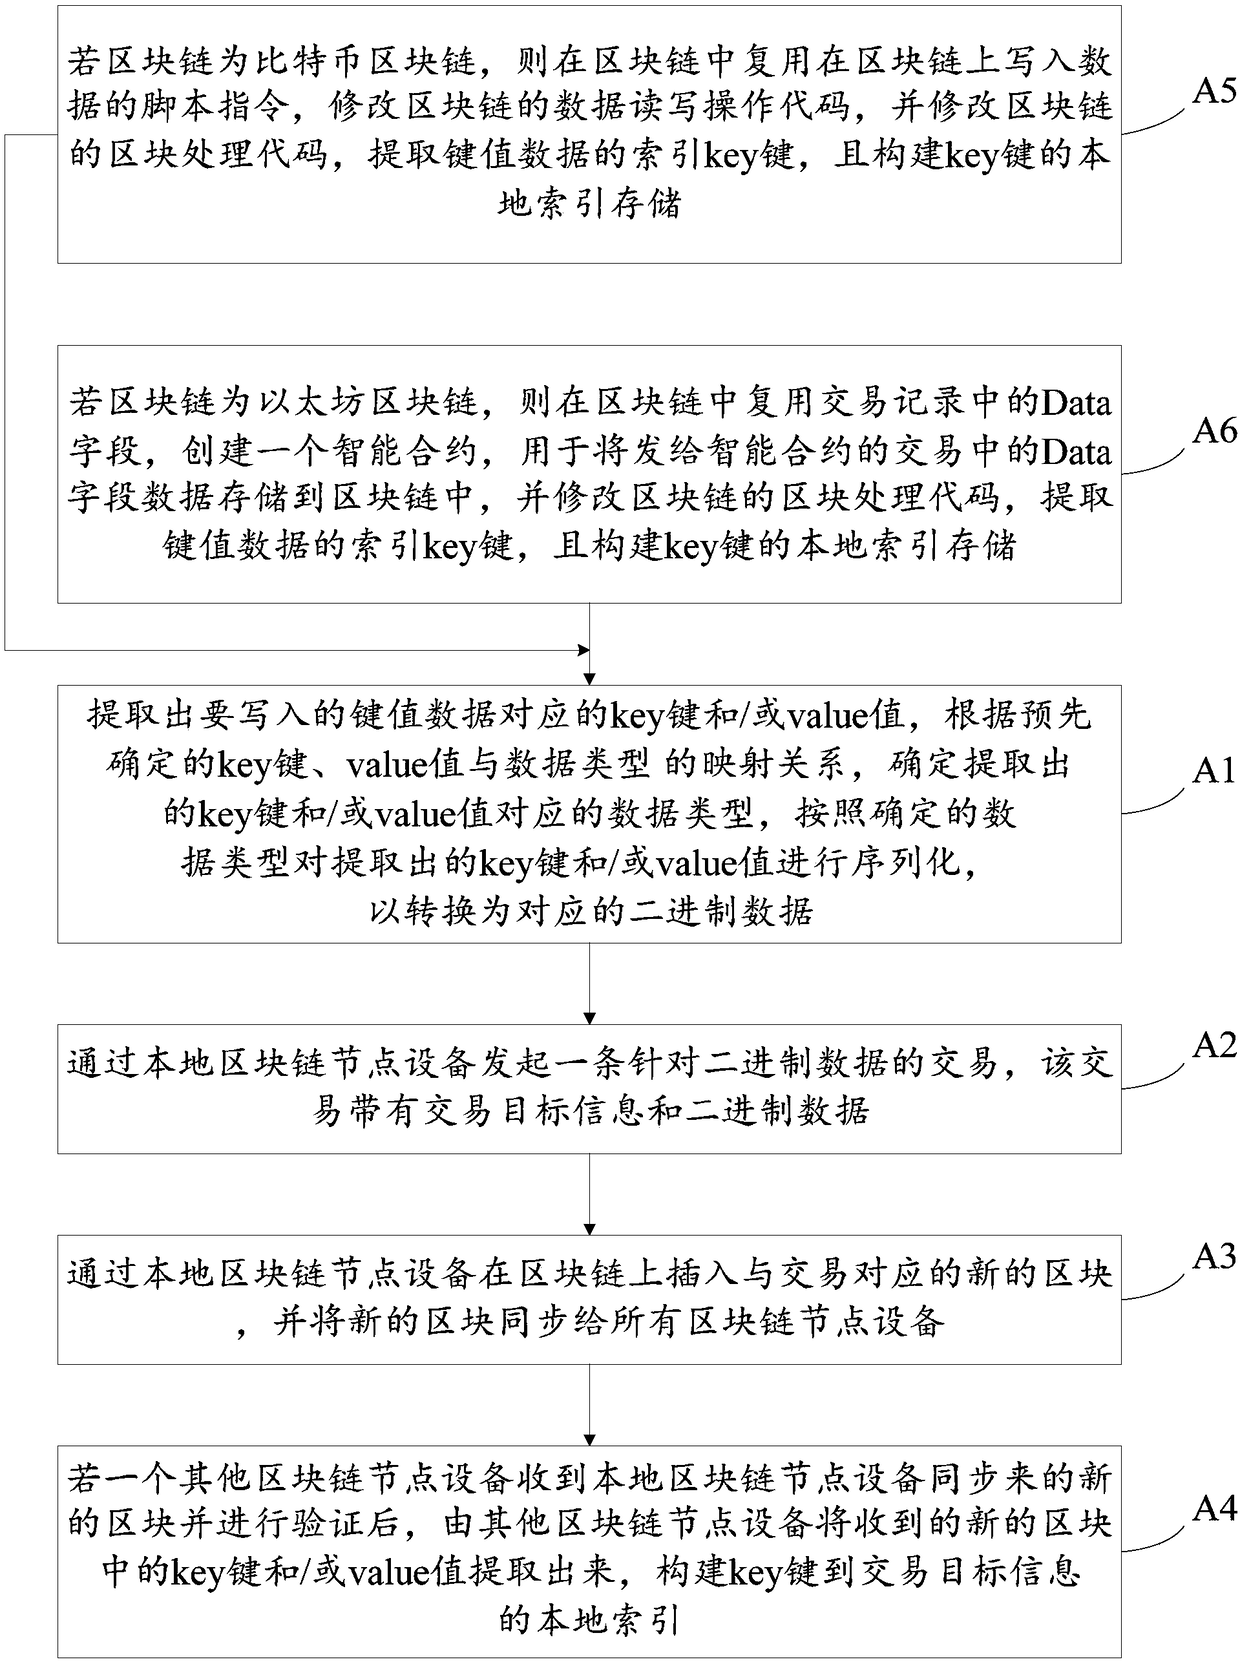 Block chain node equipment and data reading and writing-in method of distributed database